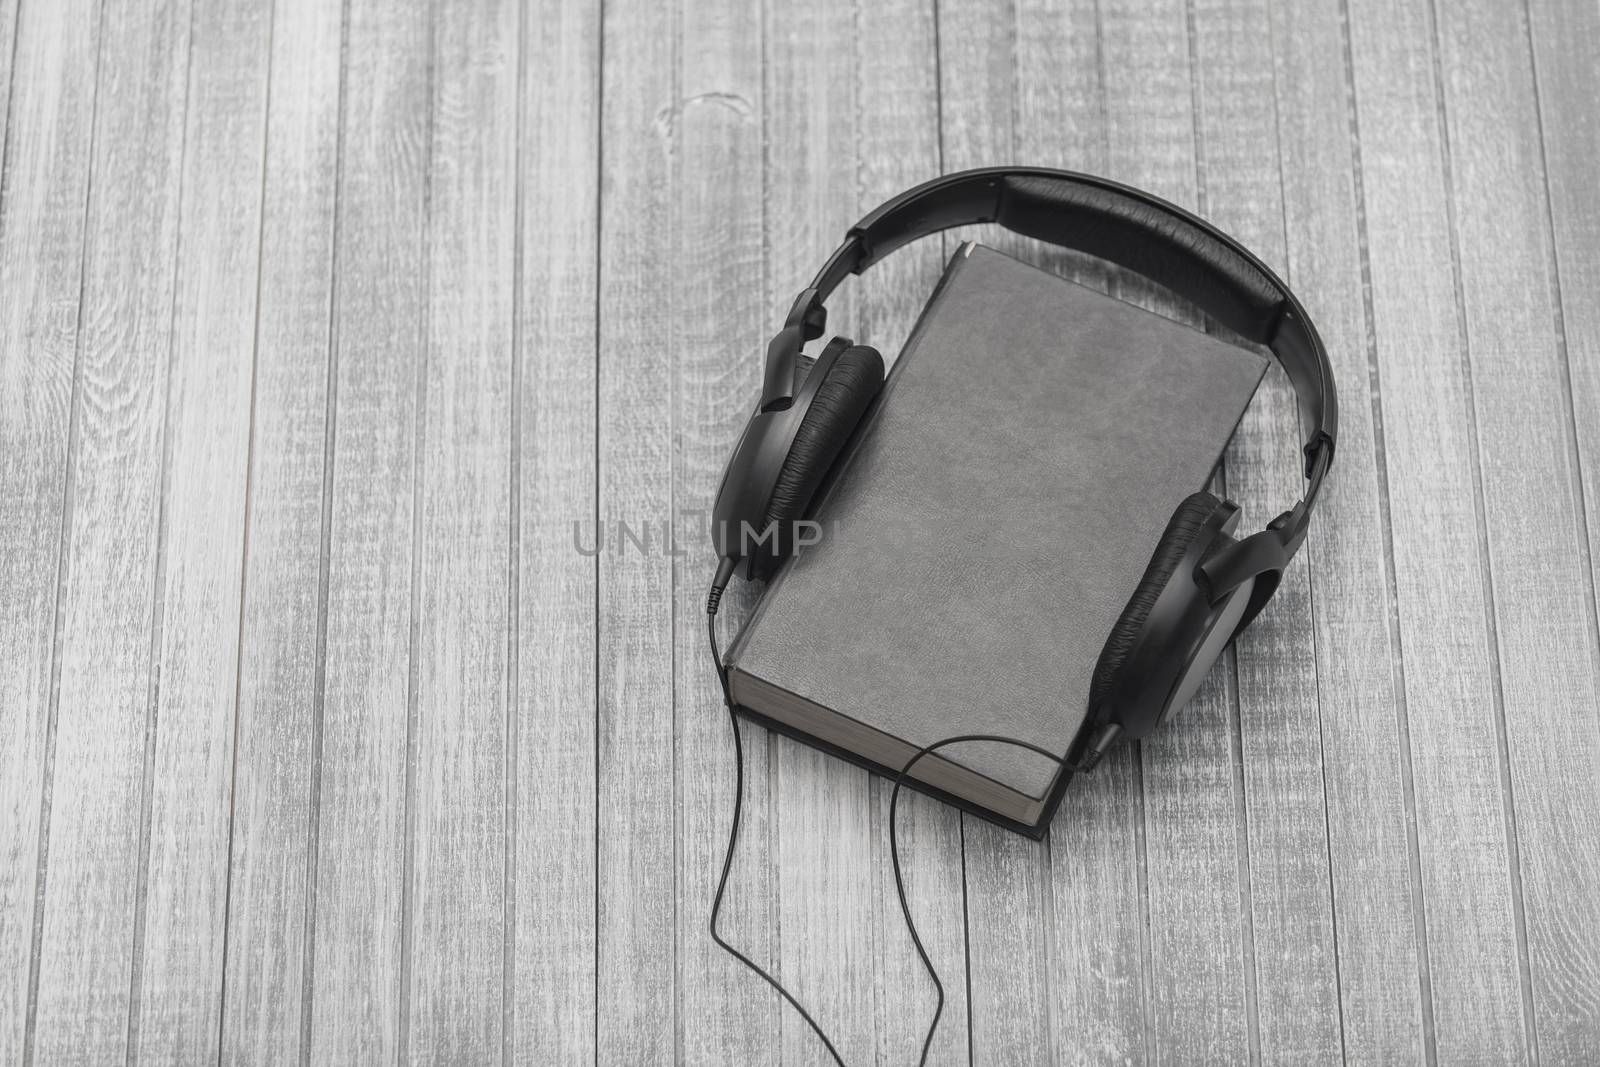 The book, big earphones lie on a wooden background, audiobooks